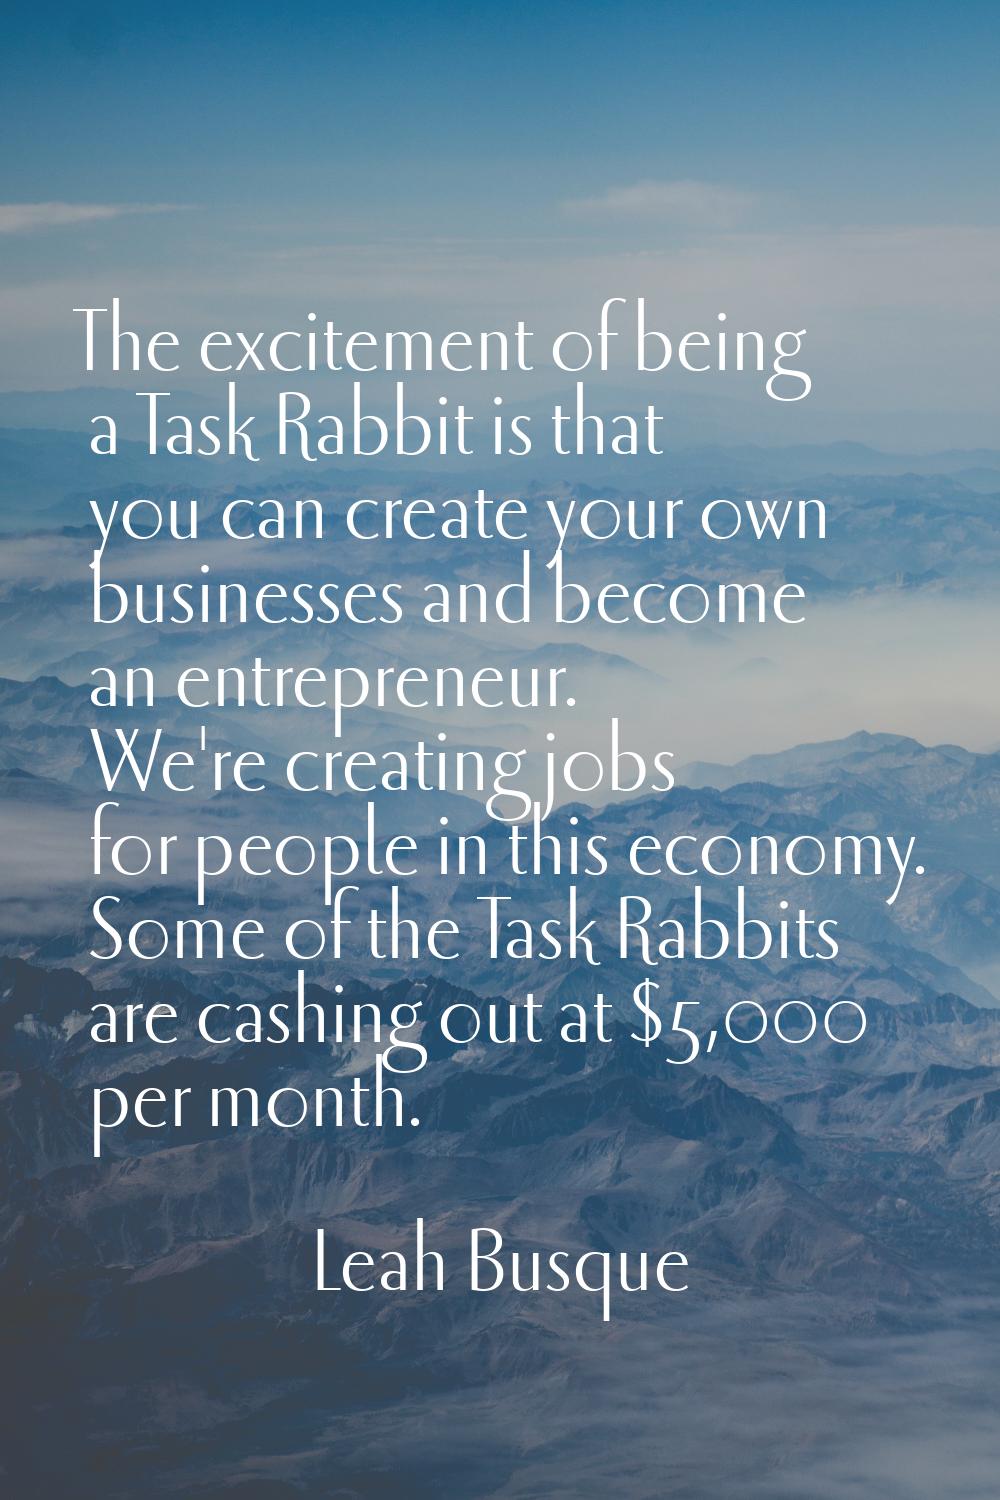 The excitement of being a Task Rabbit is that you can create your own businesses and become an entr